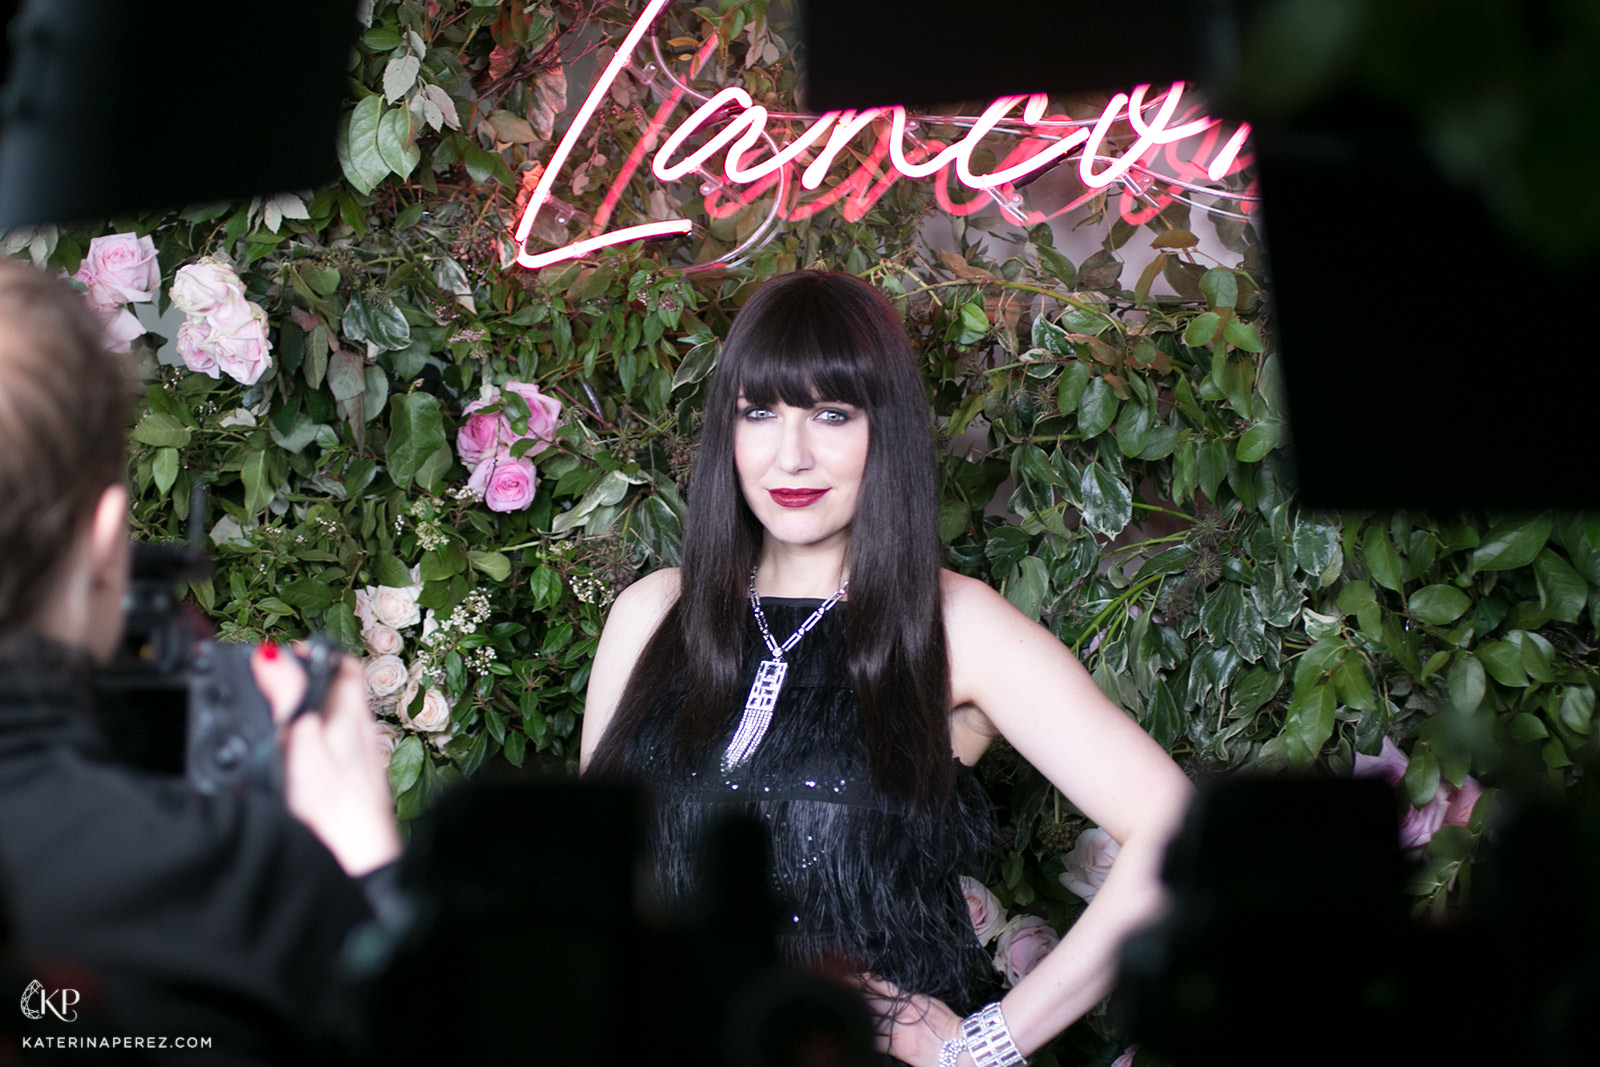 Katerina Perez at Lancome suite at the Savoy hotel